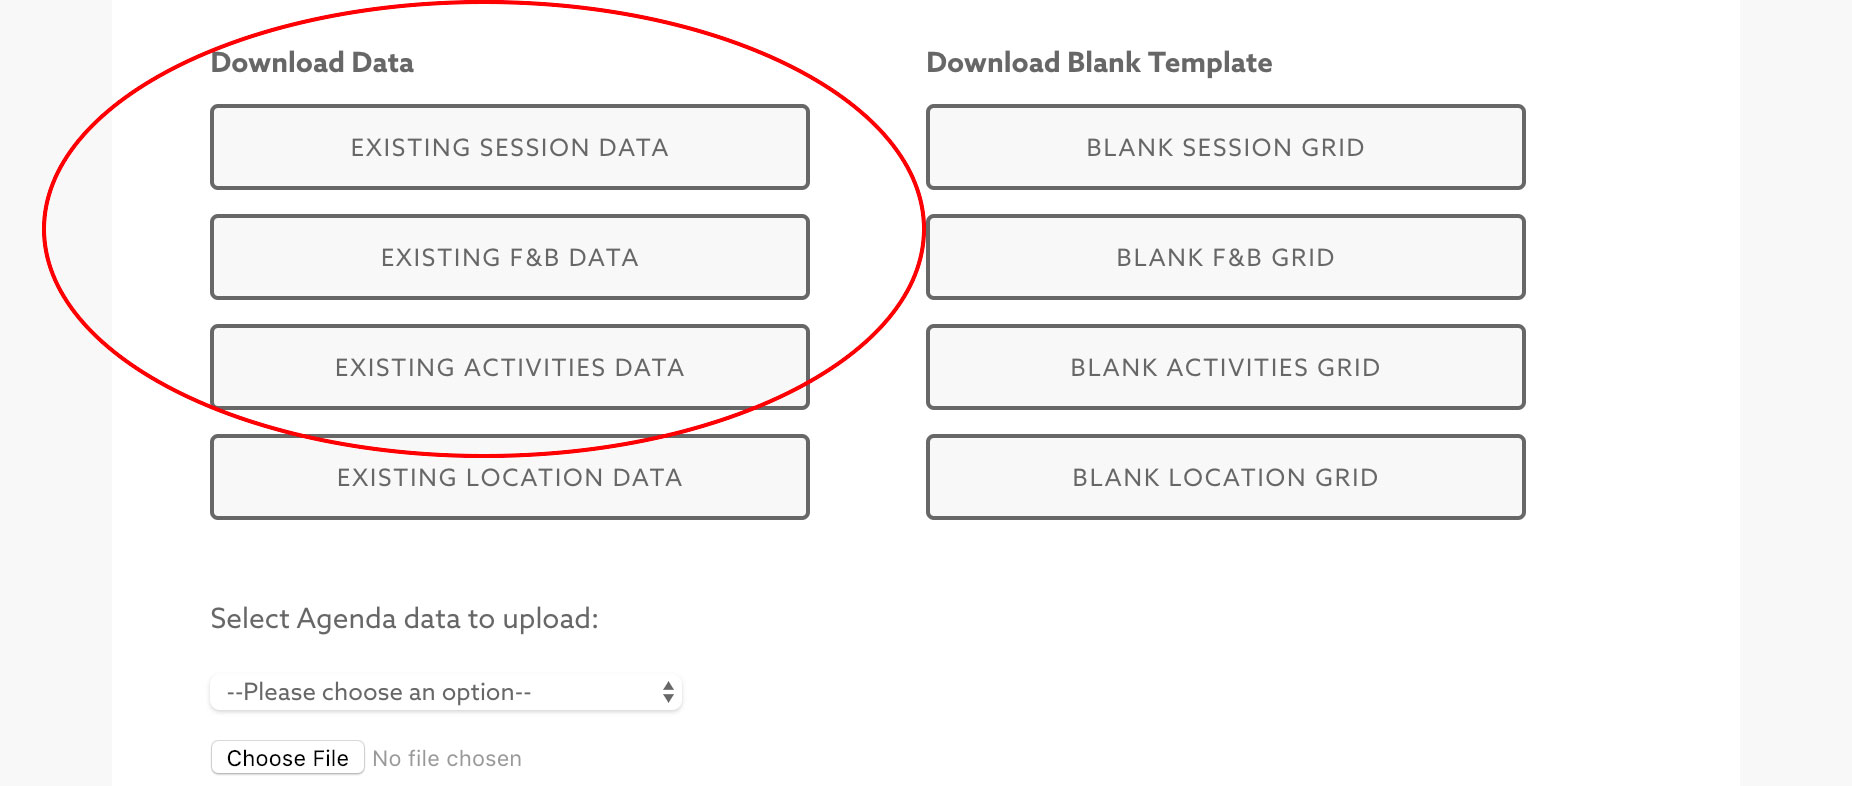 Existing data templates available for download